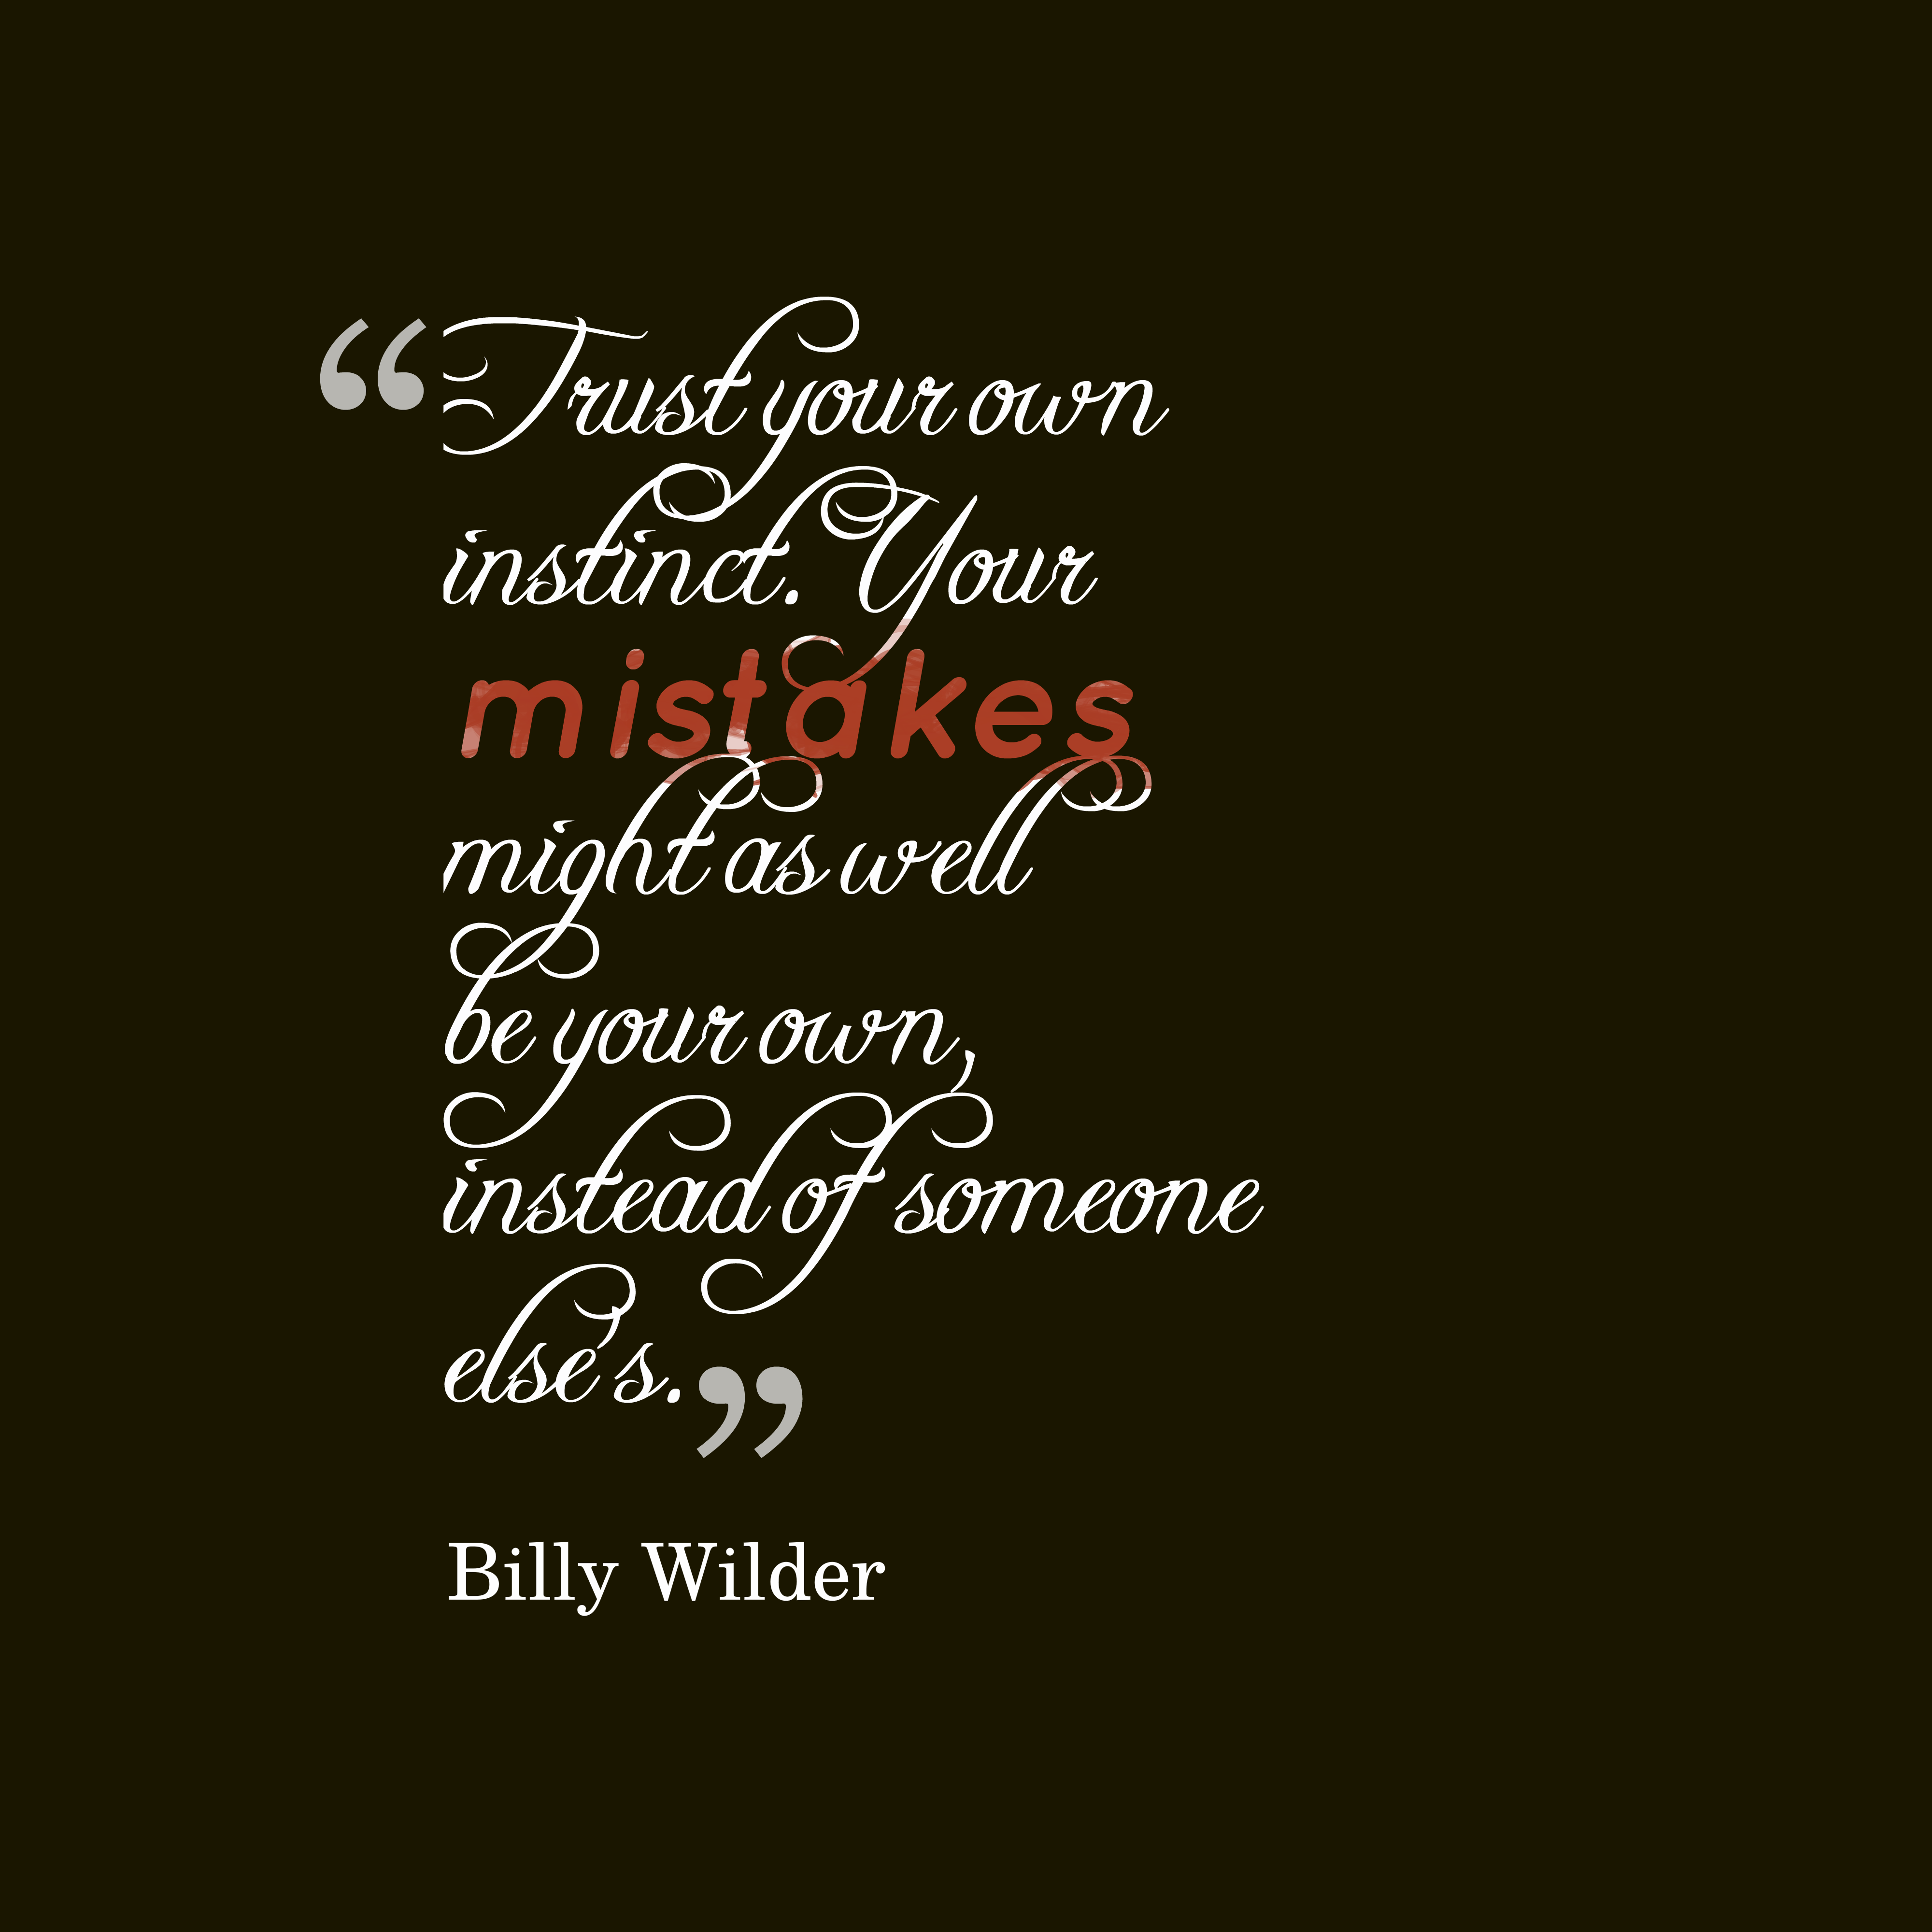 www.cuded.com/wp-content/uploads/2014/05/Trust-your-own-instinct.-Your__quotes-by-Billy-Wilder-20.png